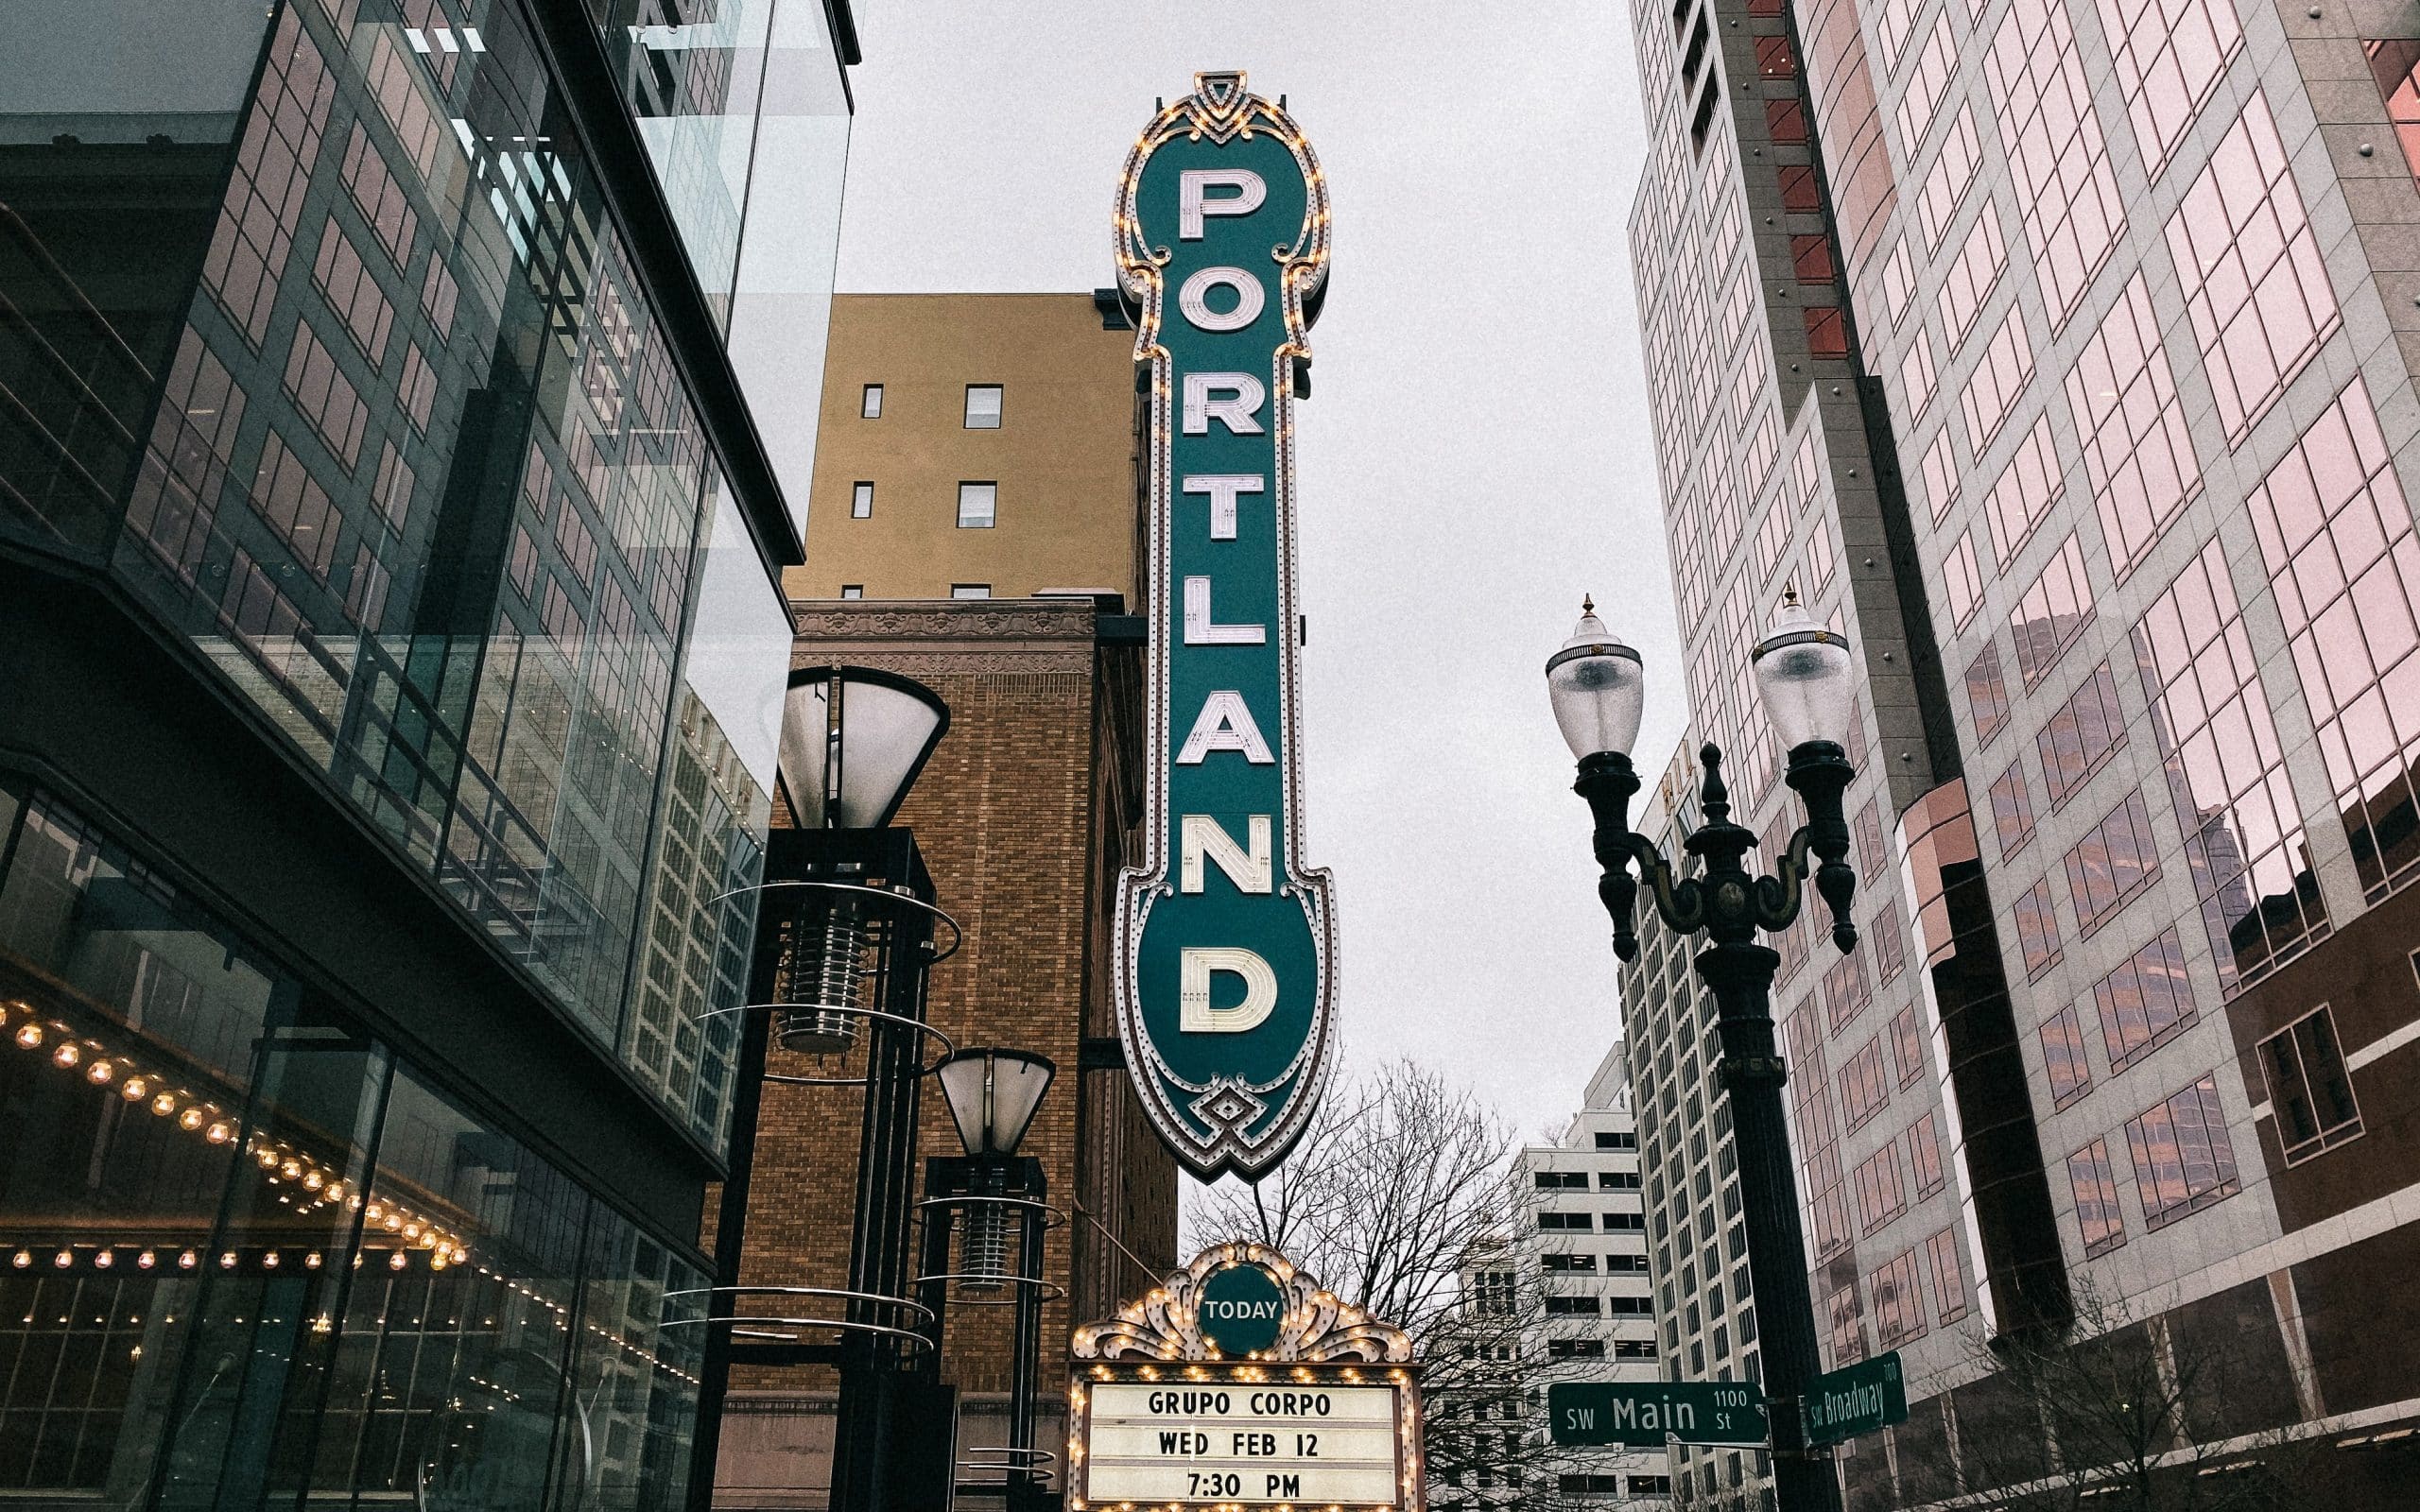 how to spend 1 day in Portland